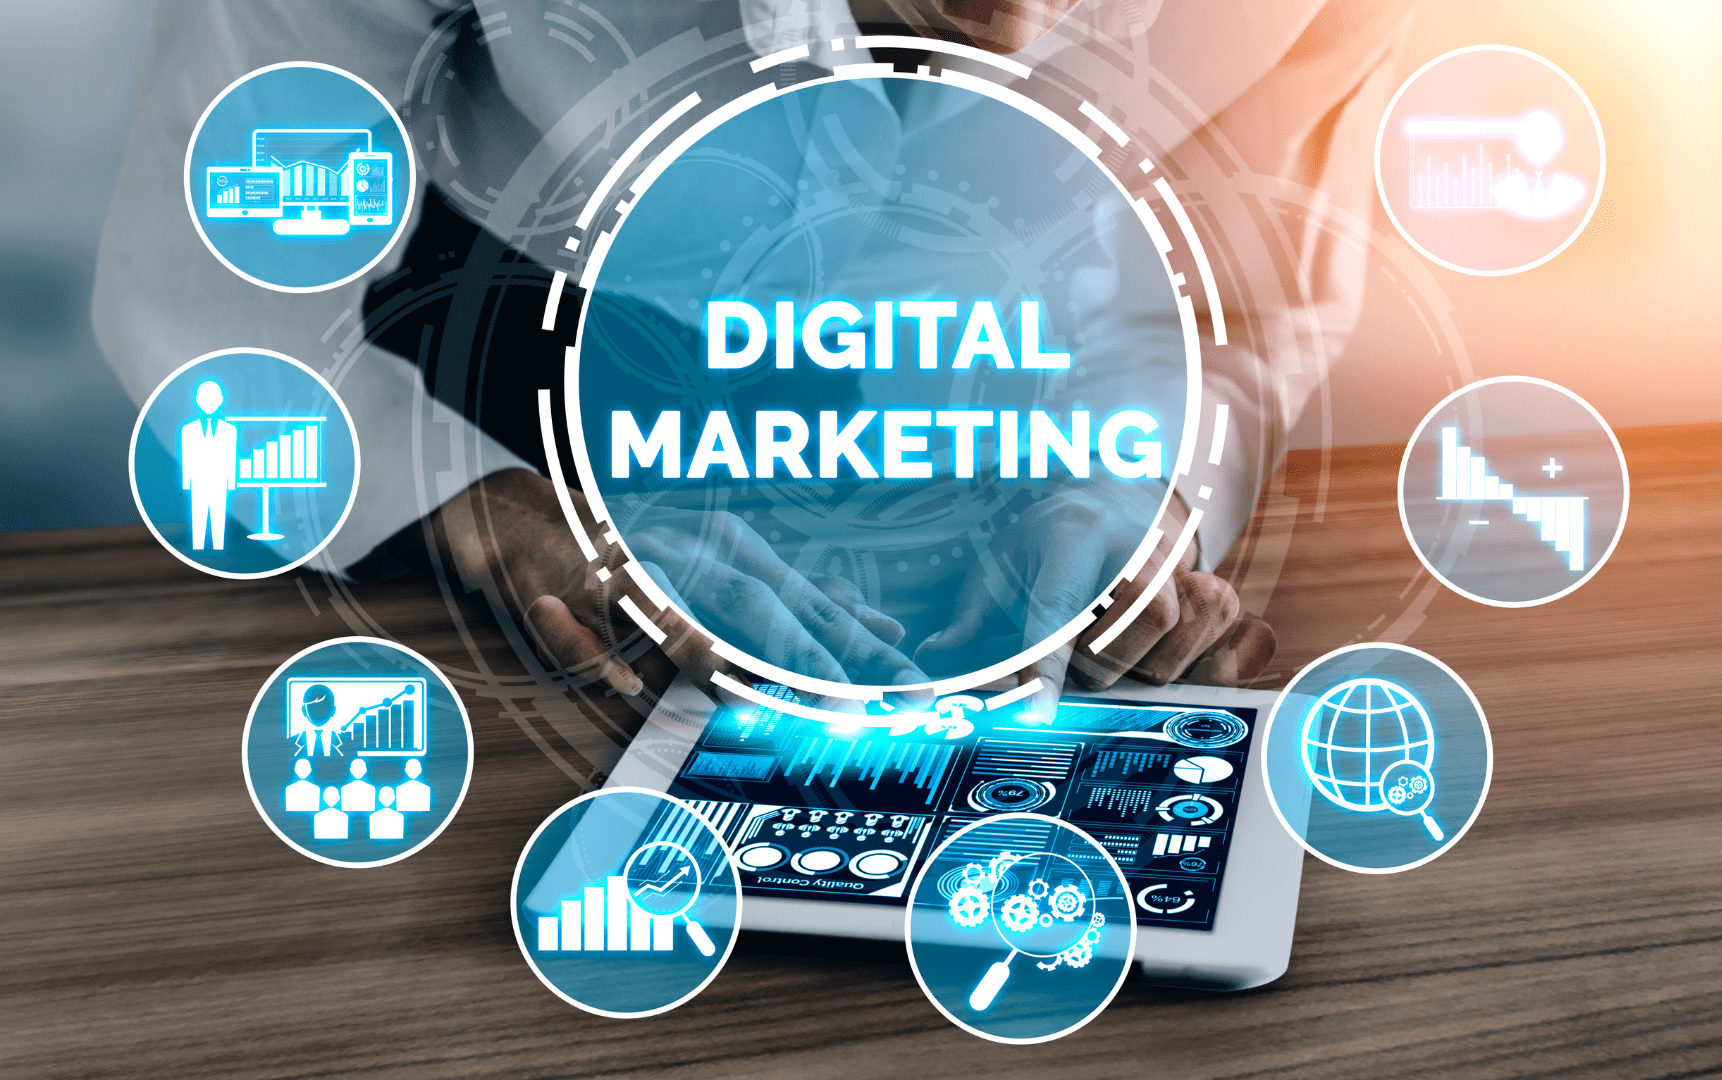 5 Reasons Why Digital Marketing is an Exciting Career Choice